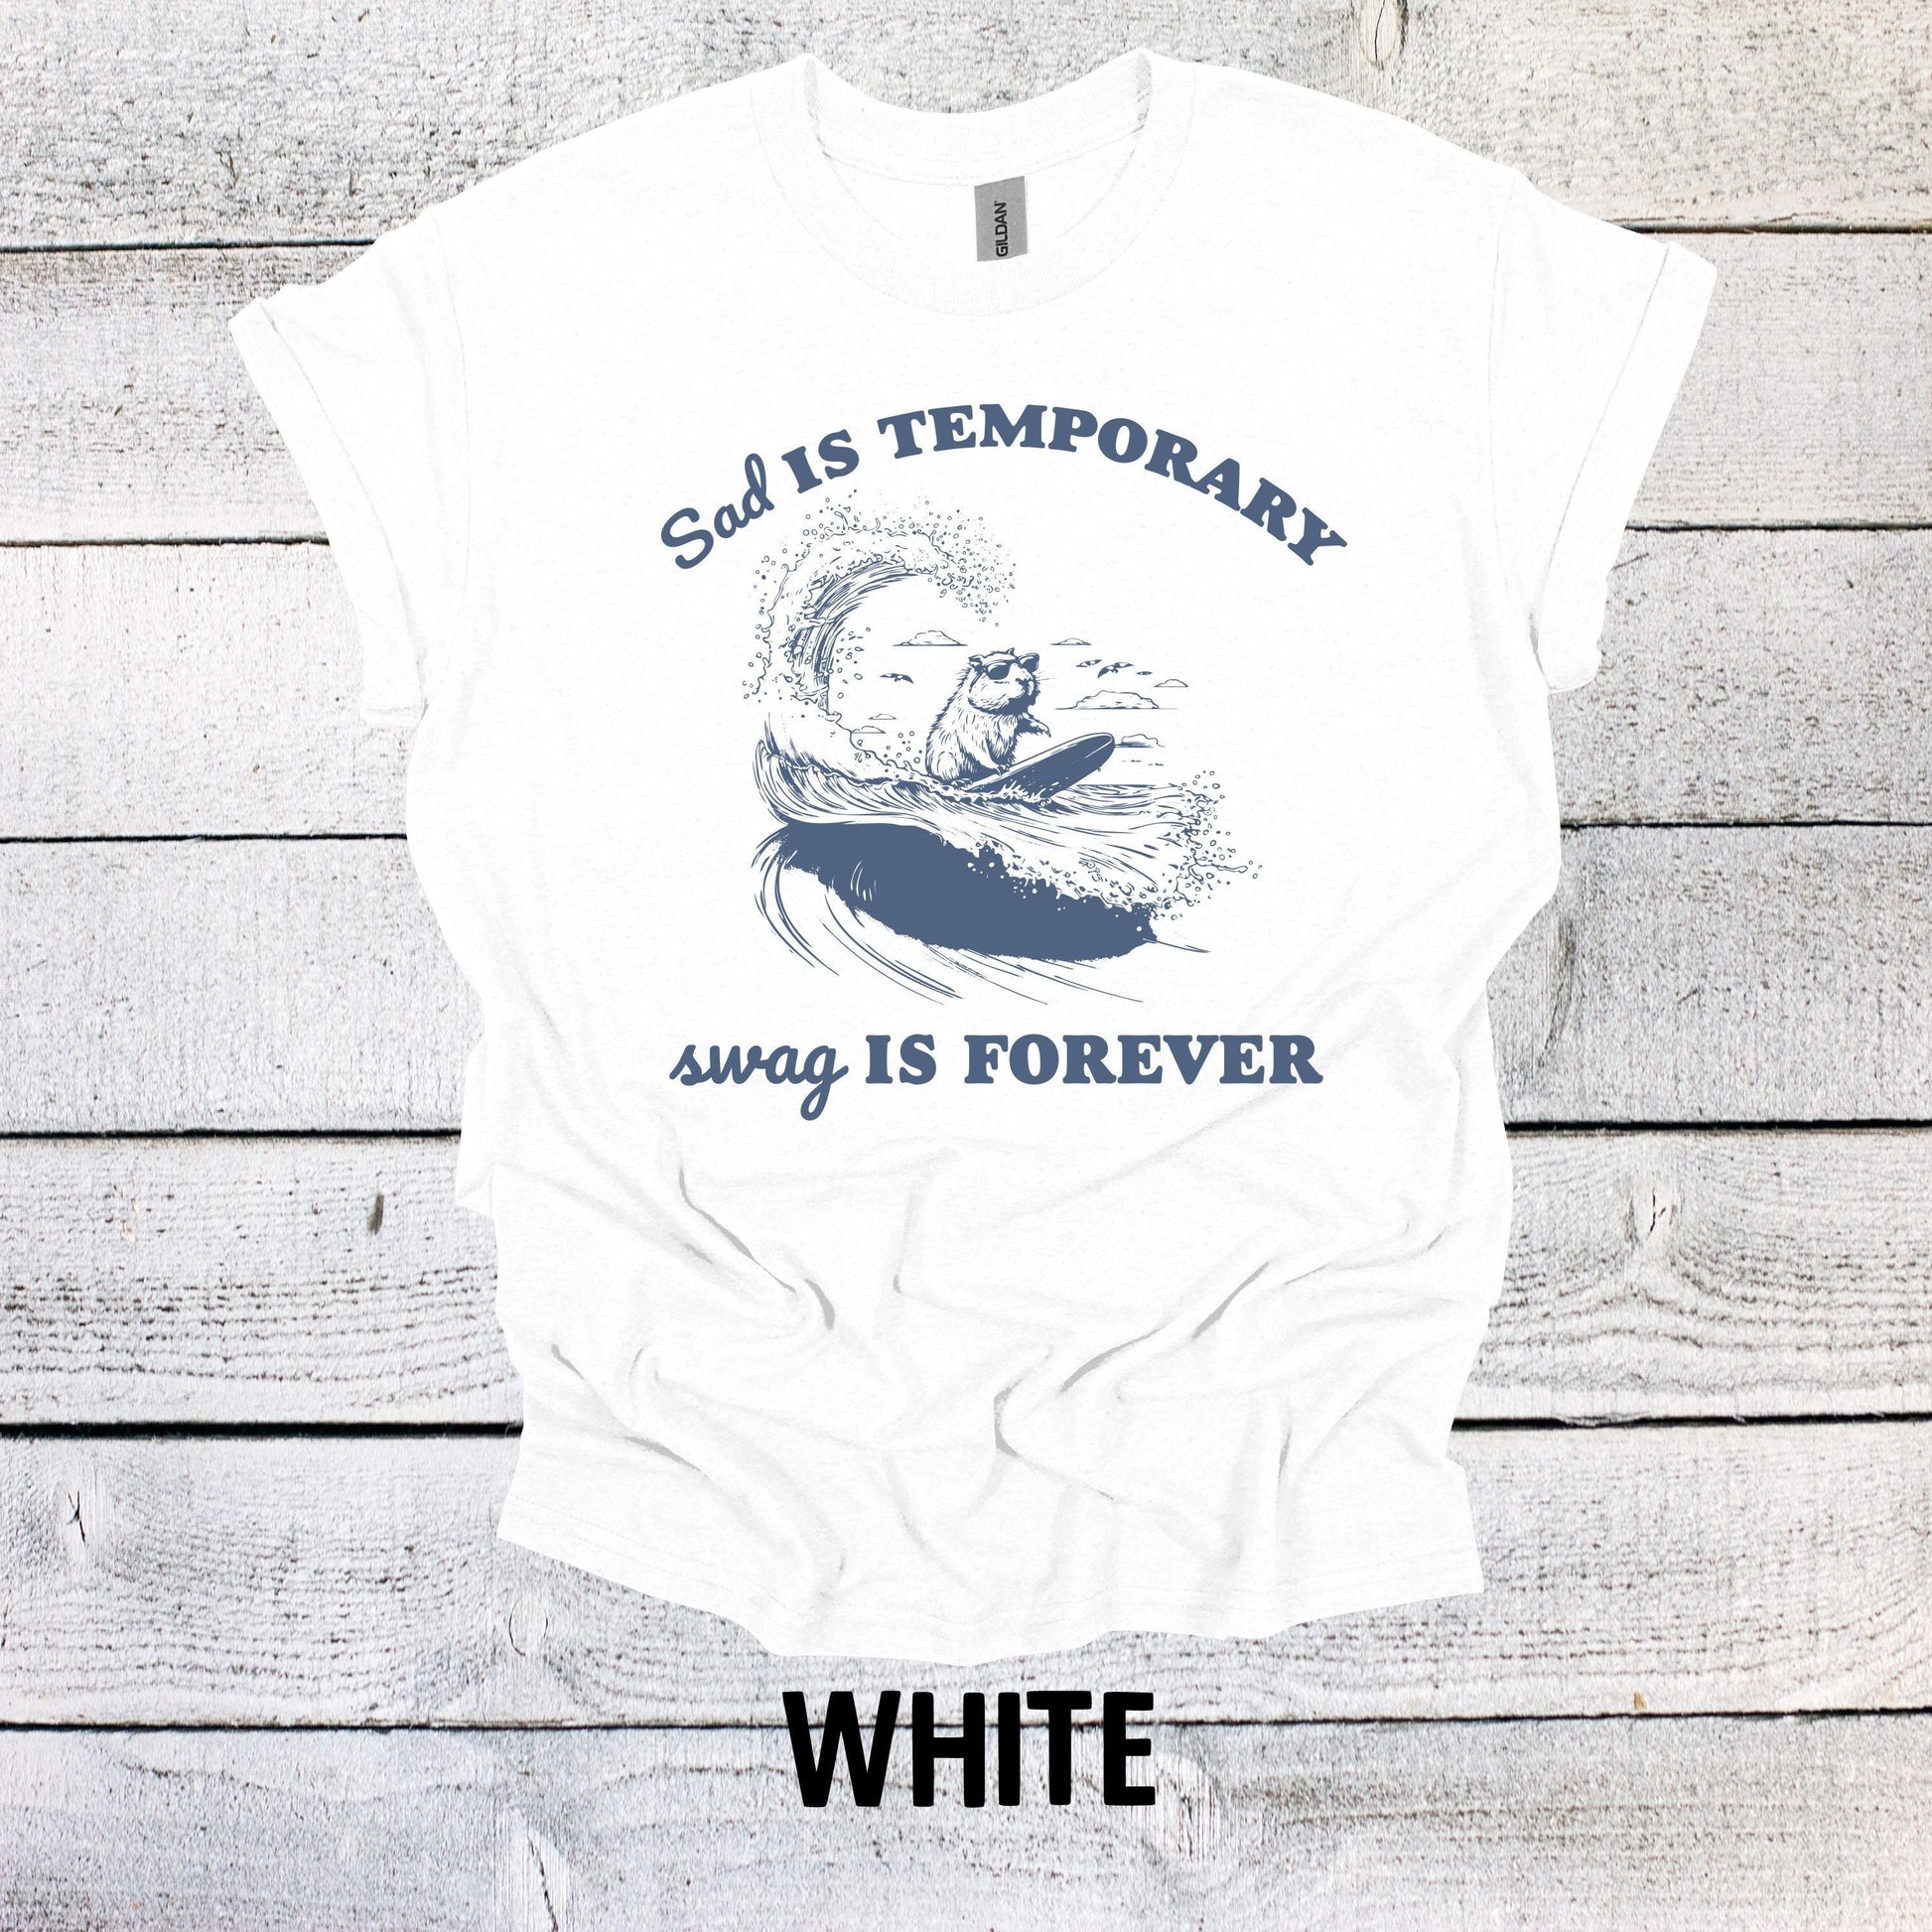 Sad is Temporary Swag is Forever Shirt Funny Graphic T-Shirt Dinosaur Shirt Funny Saying Shirt Funny Gifts Funny Meme Shirt